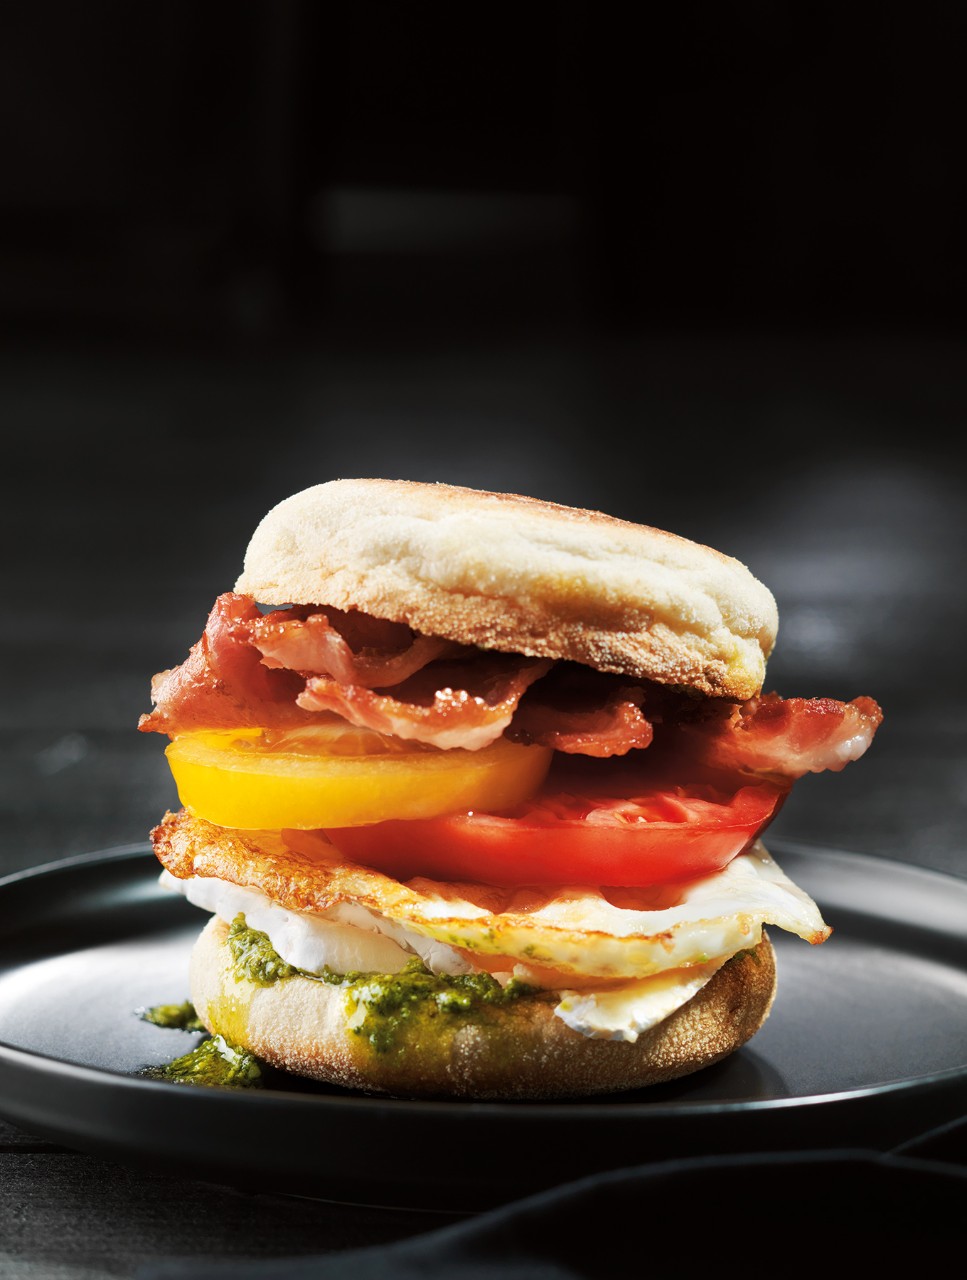 Breakfast Egg, Crispy Bacon, Heirloom Tomatoes & Brie on Toasted English Muffins